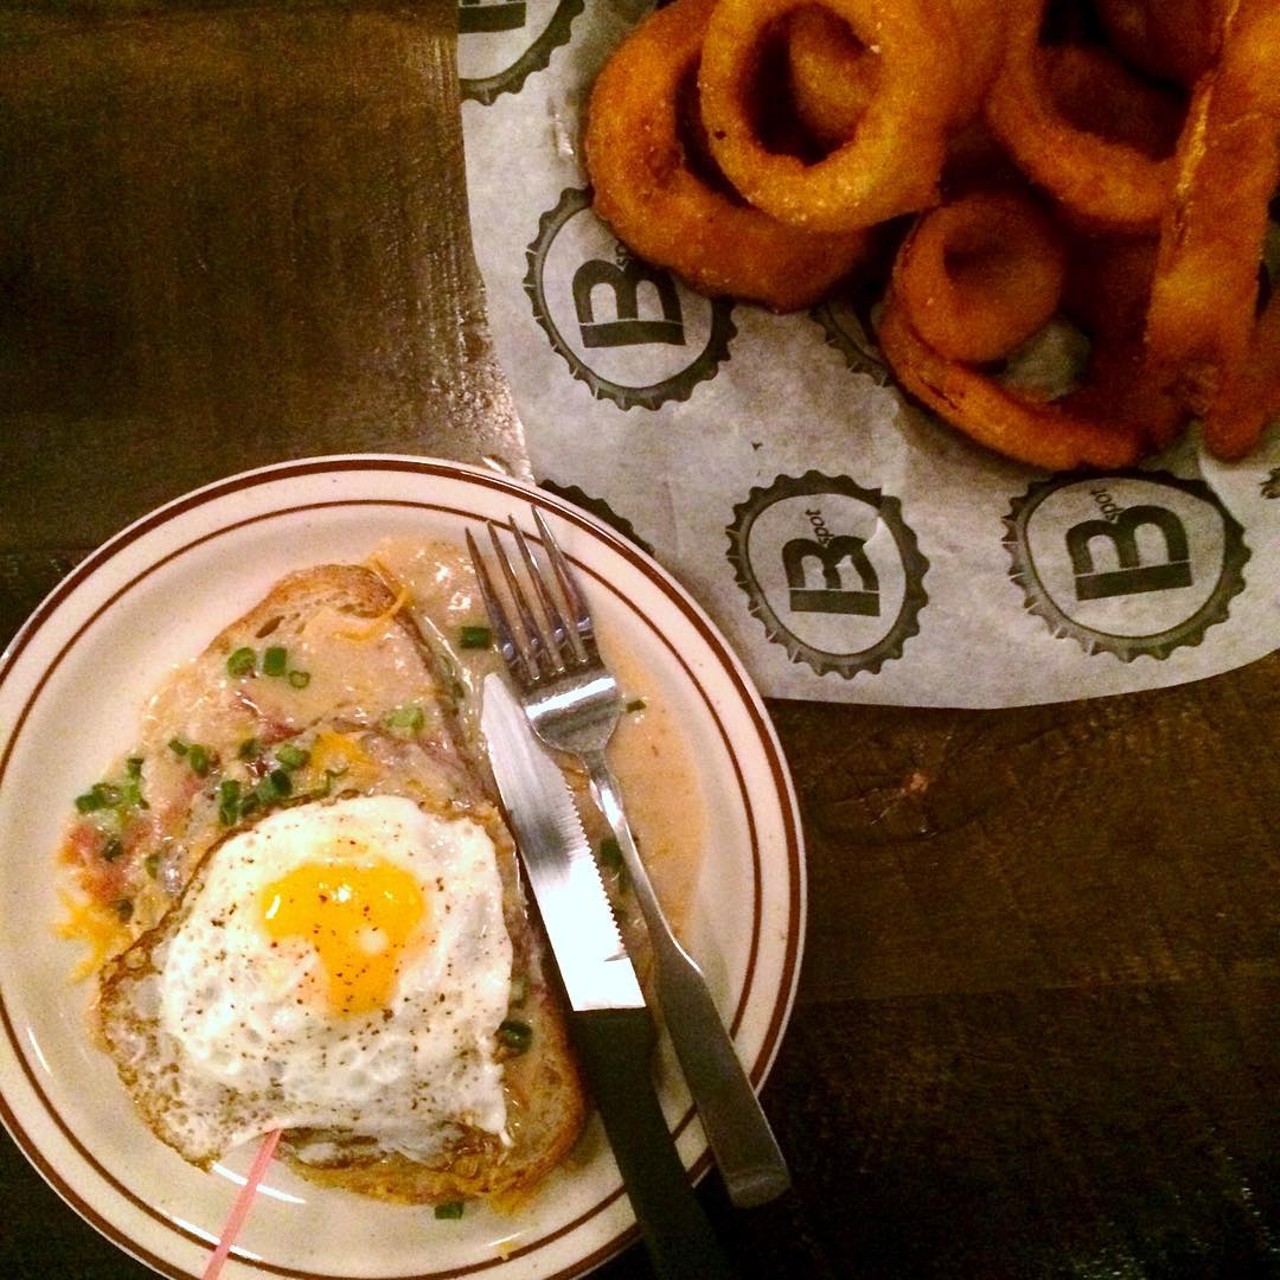 Burger can be brunch when it's an Open Face Breakfast Burger covered in sausage gravy. #clebrunch #clefood #cleeats